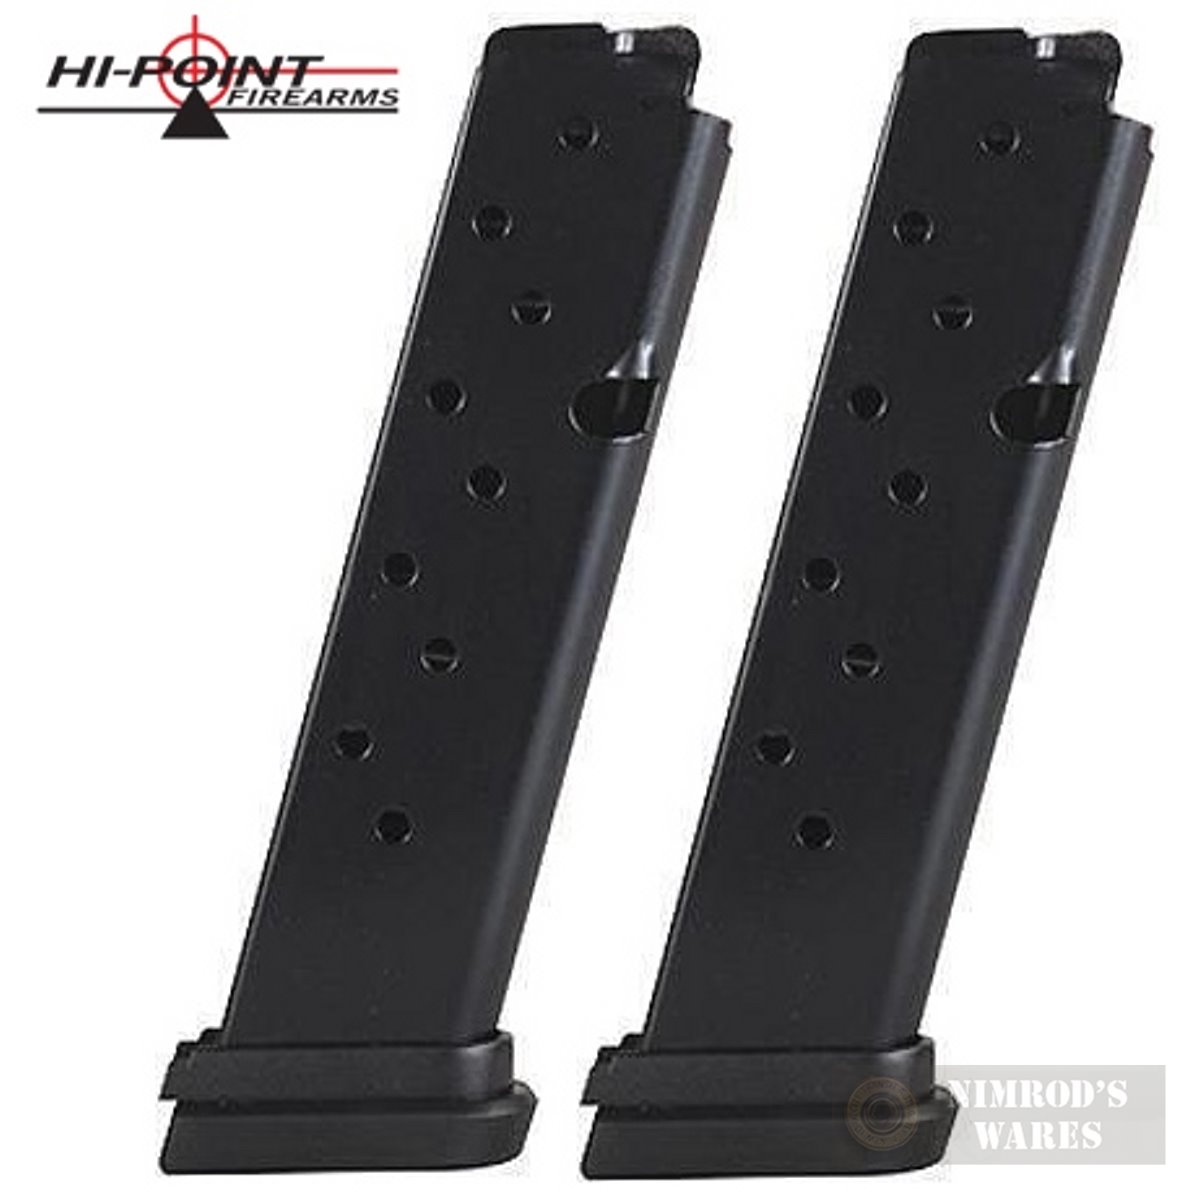 TWO Hi-Point 995 995TS CARBINE 9mm 10 Round MAGS CLP995-img-1